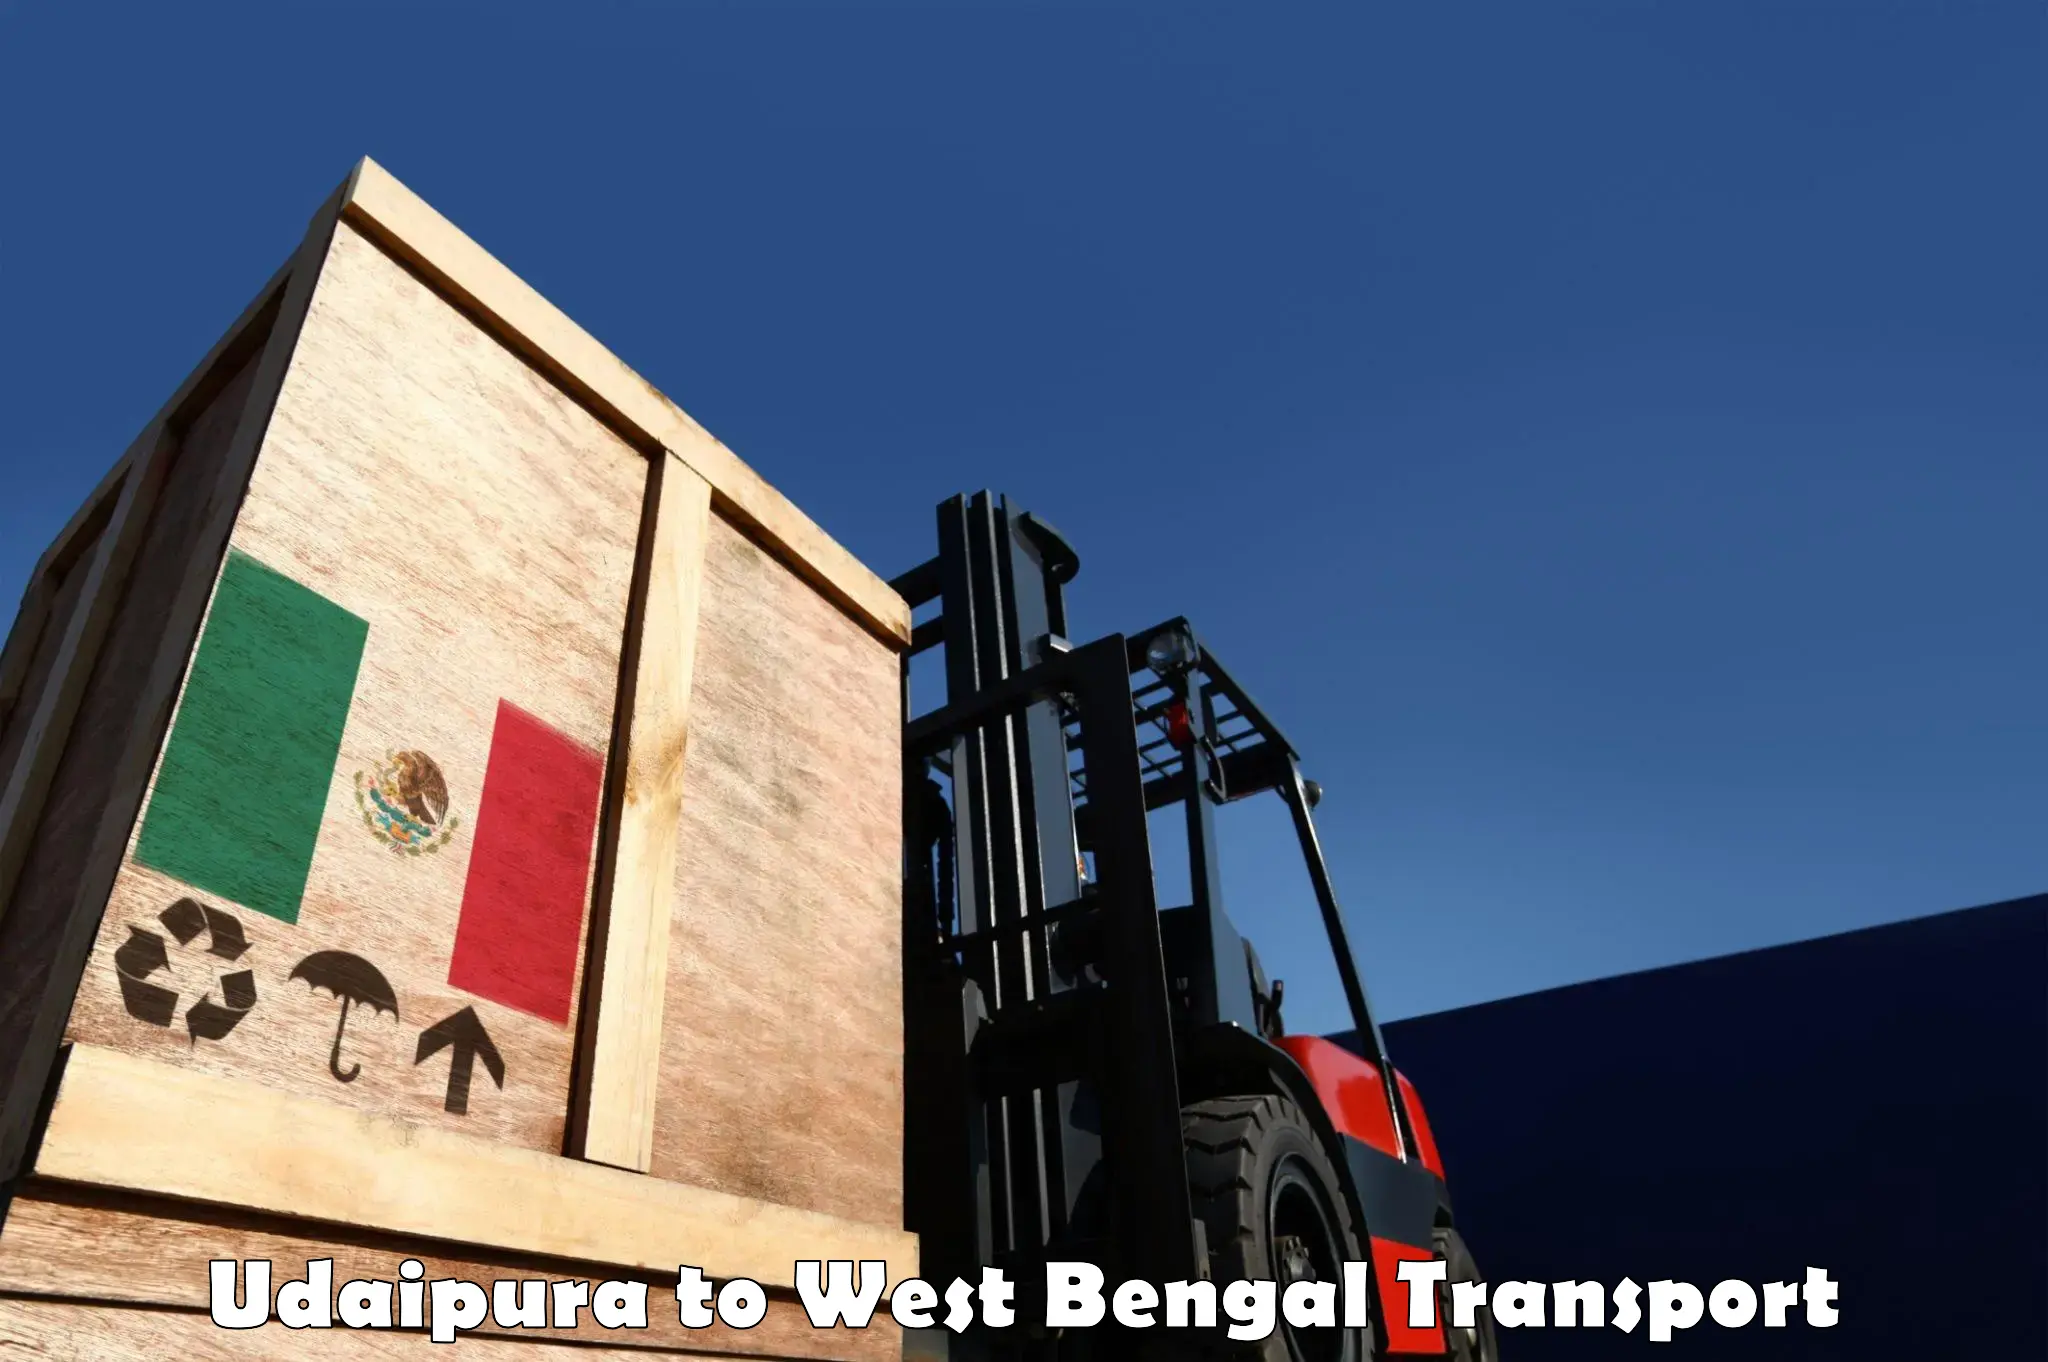 Lorry transport service Udaipura to West Bengal